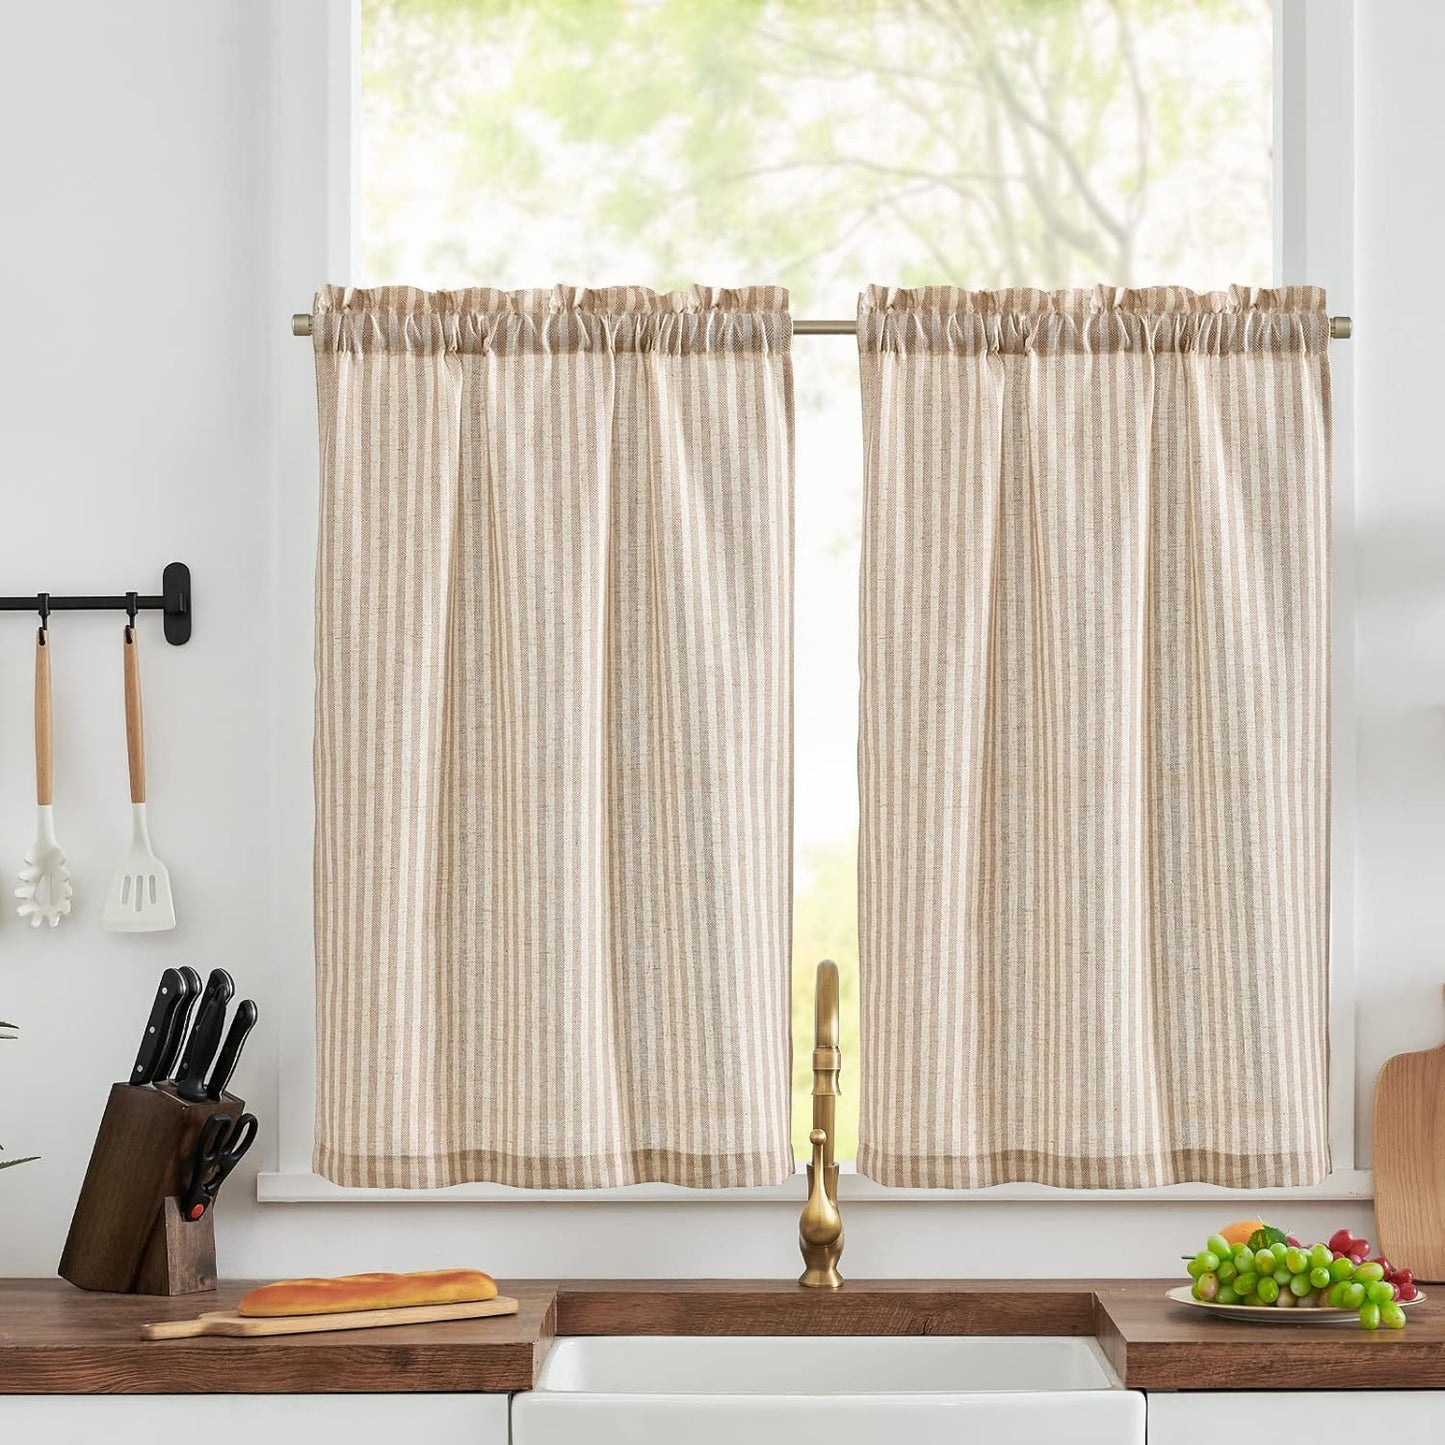 Jinchan Kitchen Curtains Striped Tier Curtains Ticking Stripe Linen Curtains Pinstripe Cafe Curtains 24 Inch Length for Living Room Bathroom Farmhouse Curtains Rod Pocket 2 Panels Black on Beige  CKNY HOME FASHION Rod Pocket Striped Tan W26 X L45 